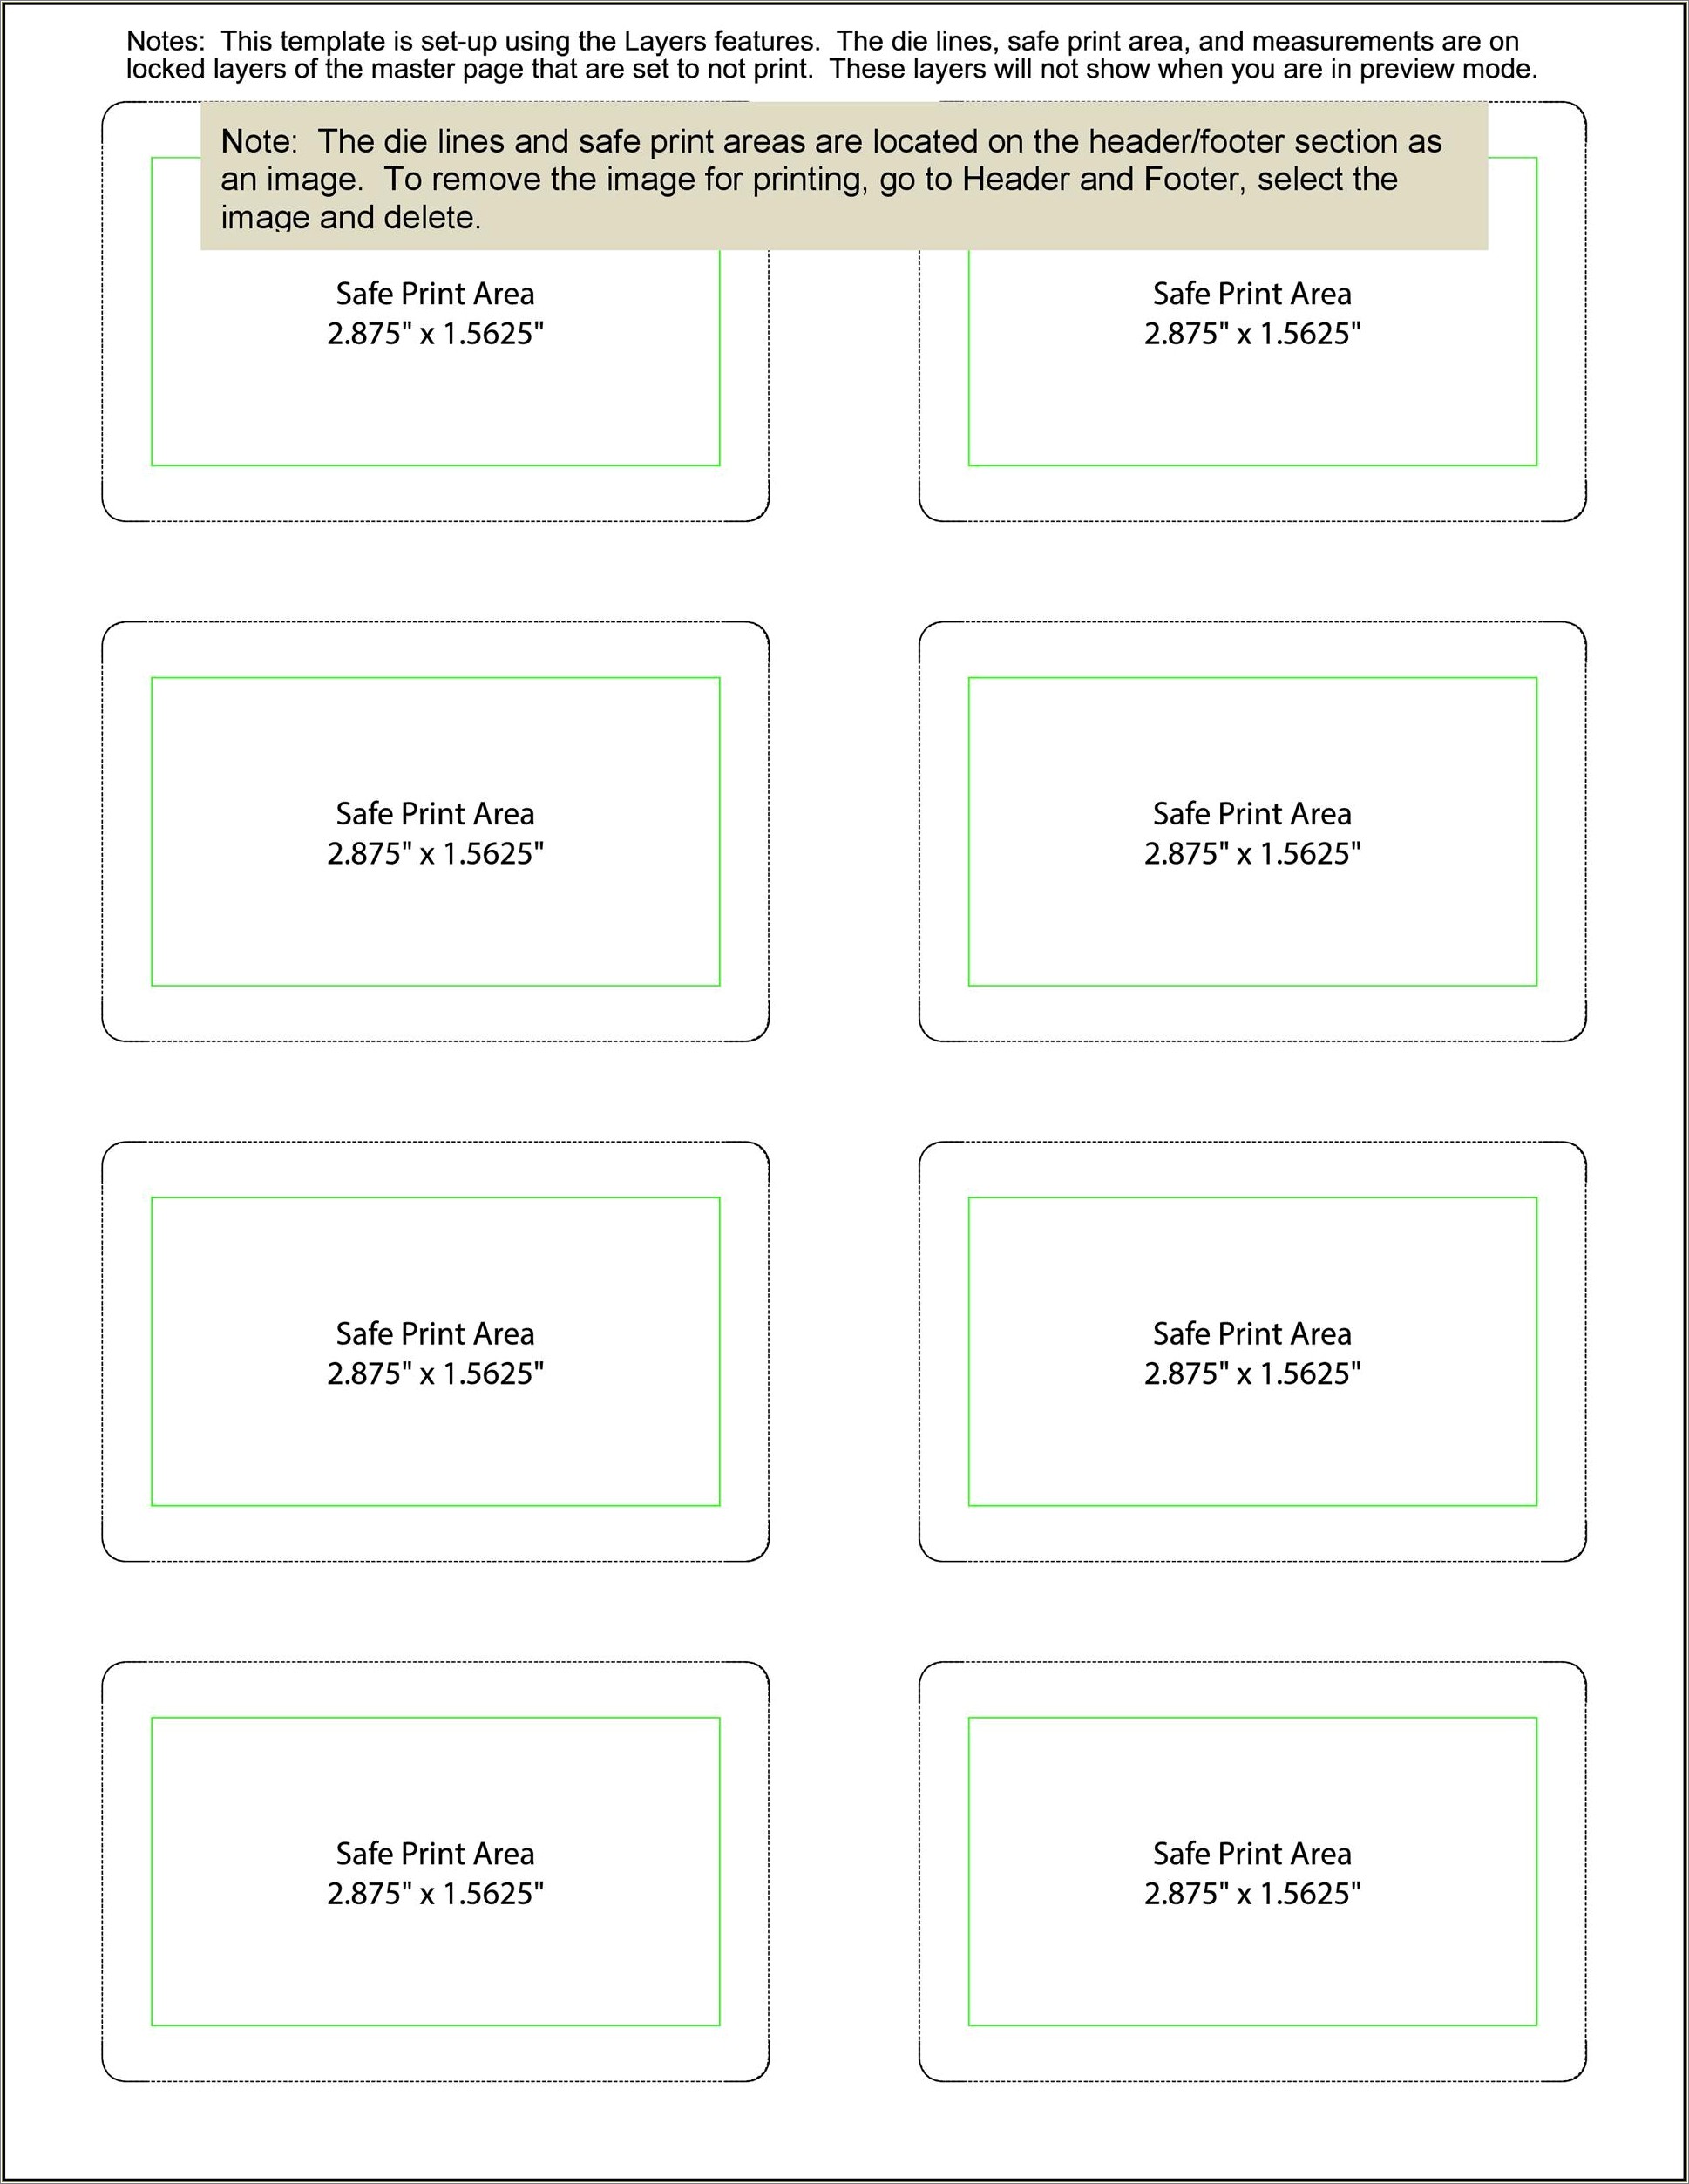 Food Tent Card Template Free Download